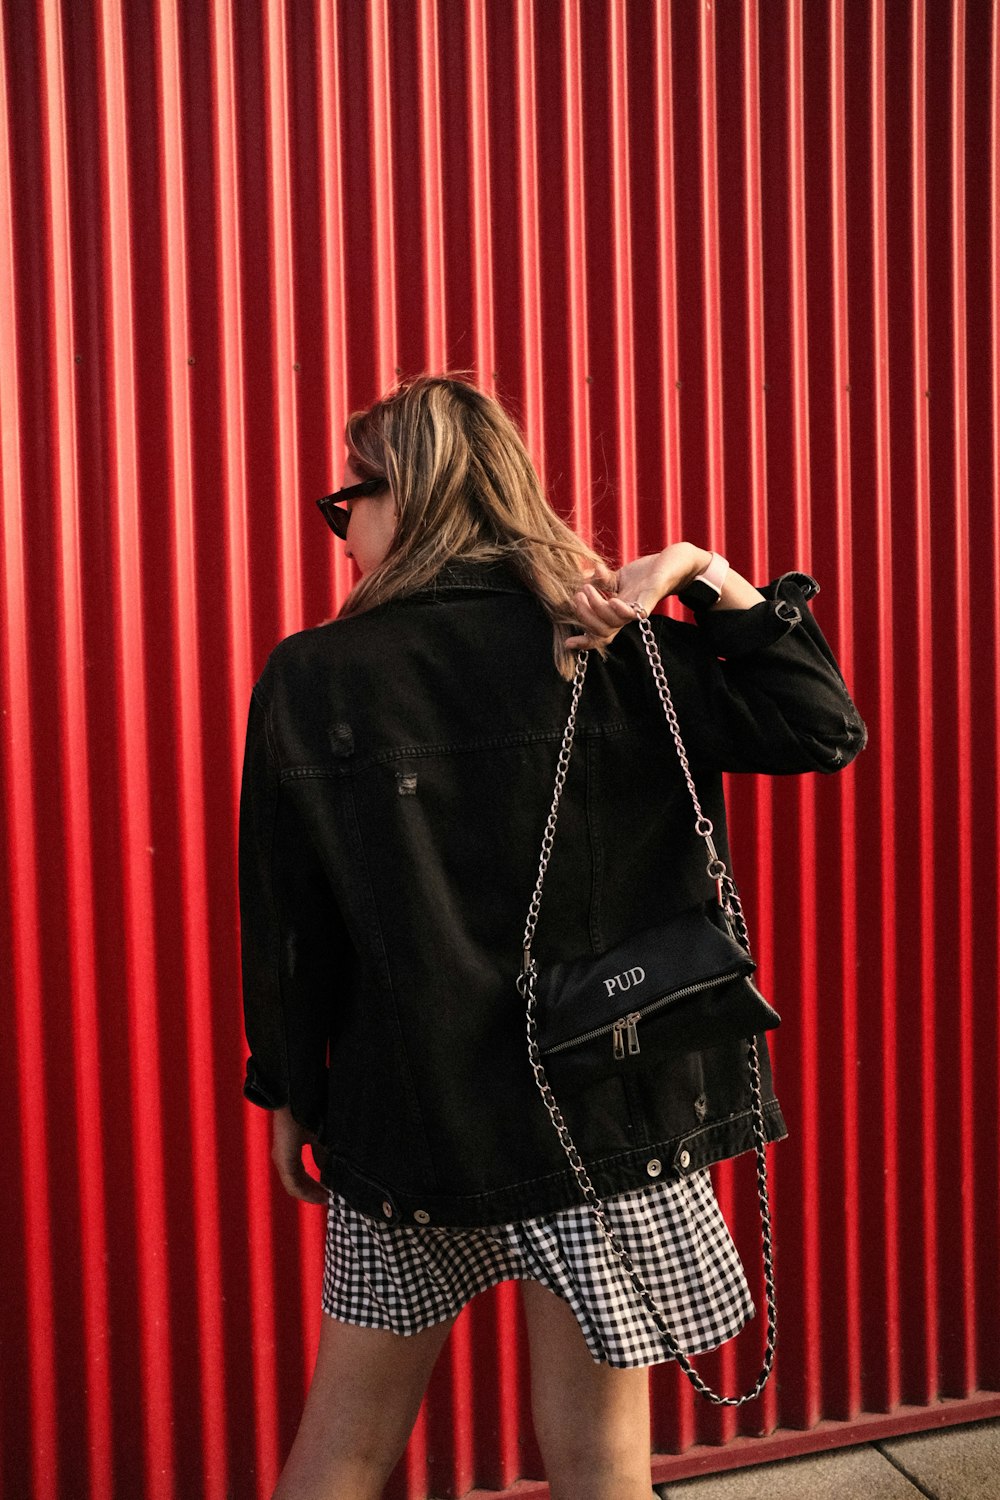 a woman in a black jacket carrying a black purse